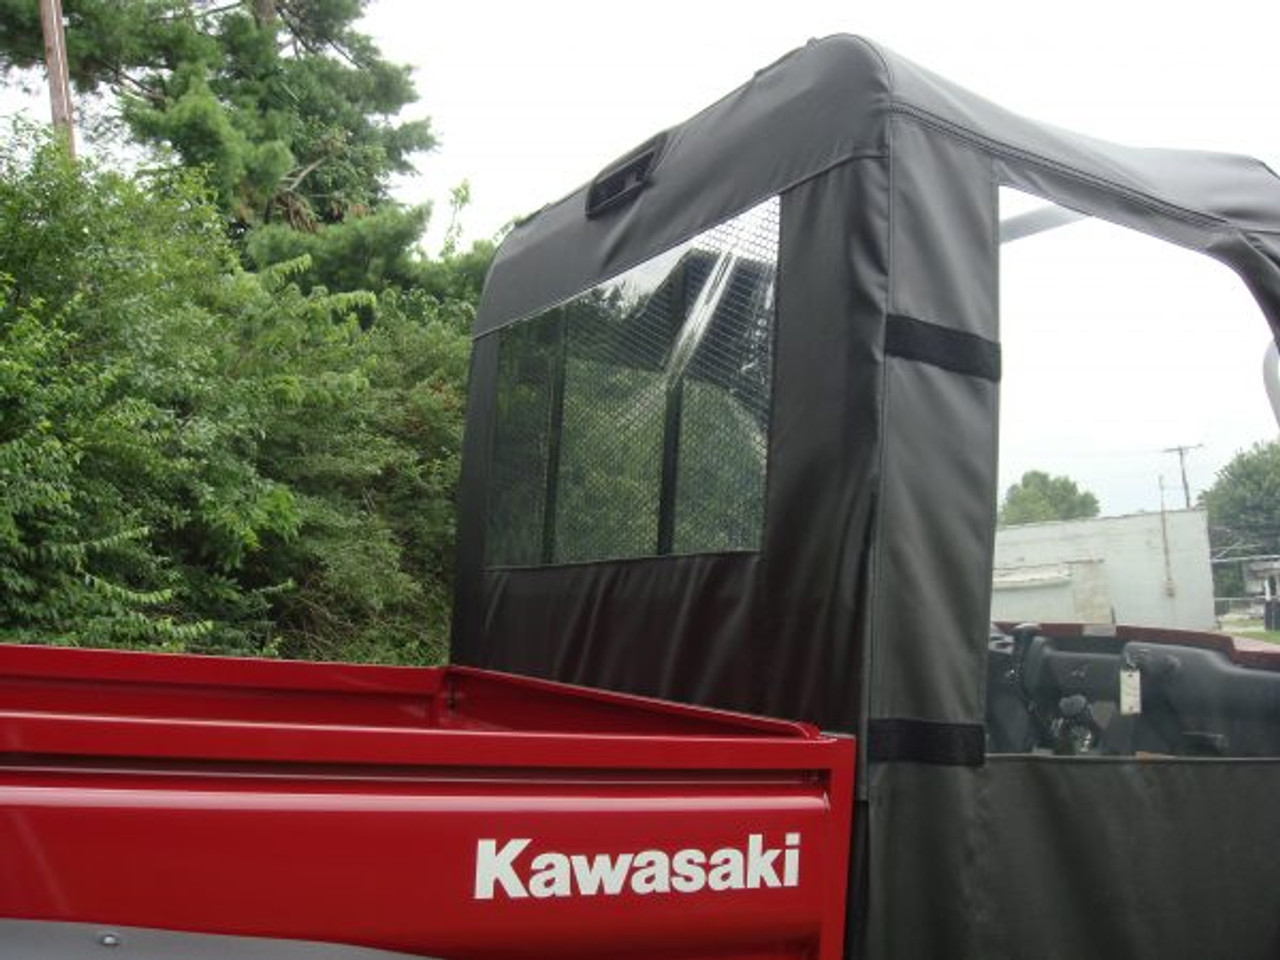 3 Star side x side Kawasaki Mule 4000/4010 doors and rear window rear and side angle view close up